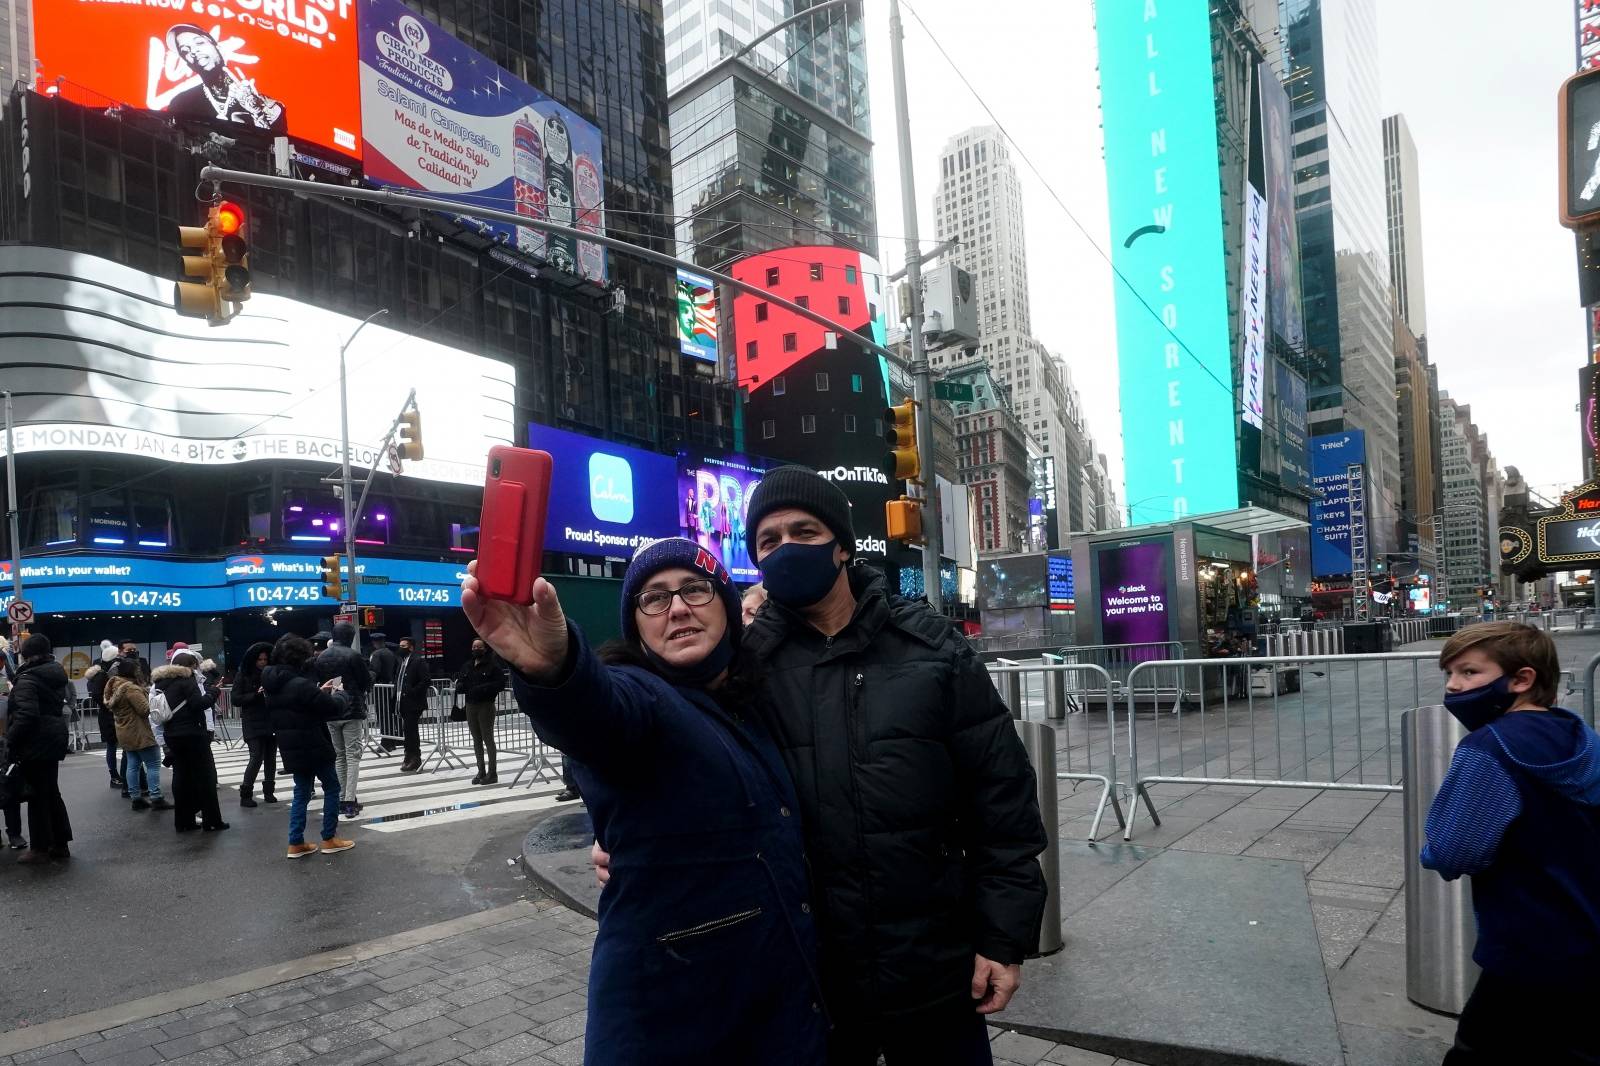 People take a selfie in Times Square ahead of New Year's Eve